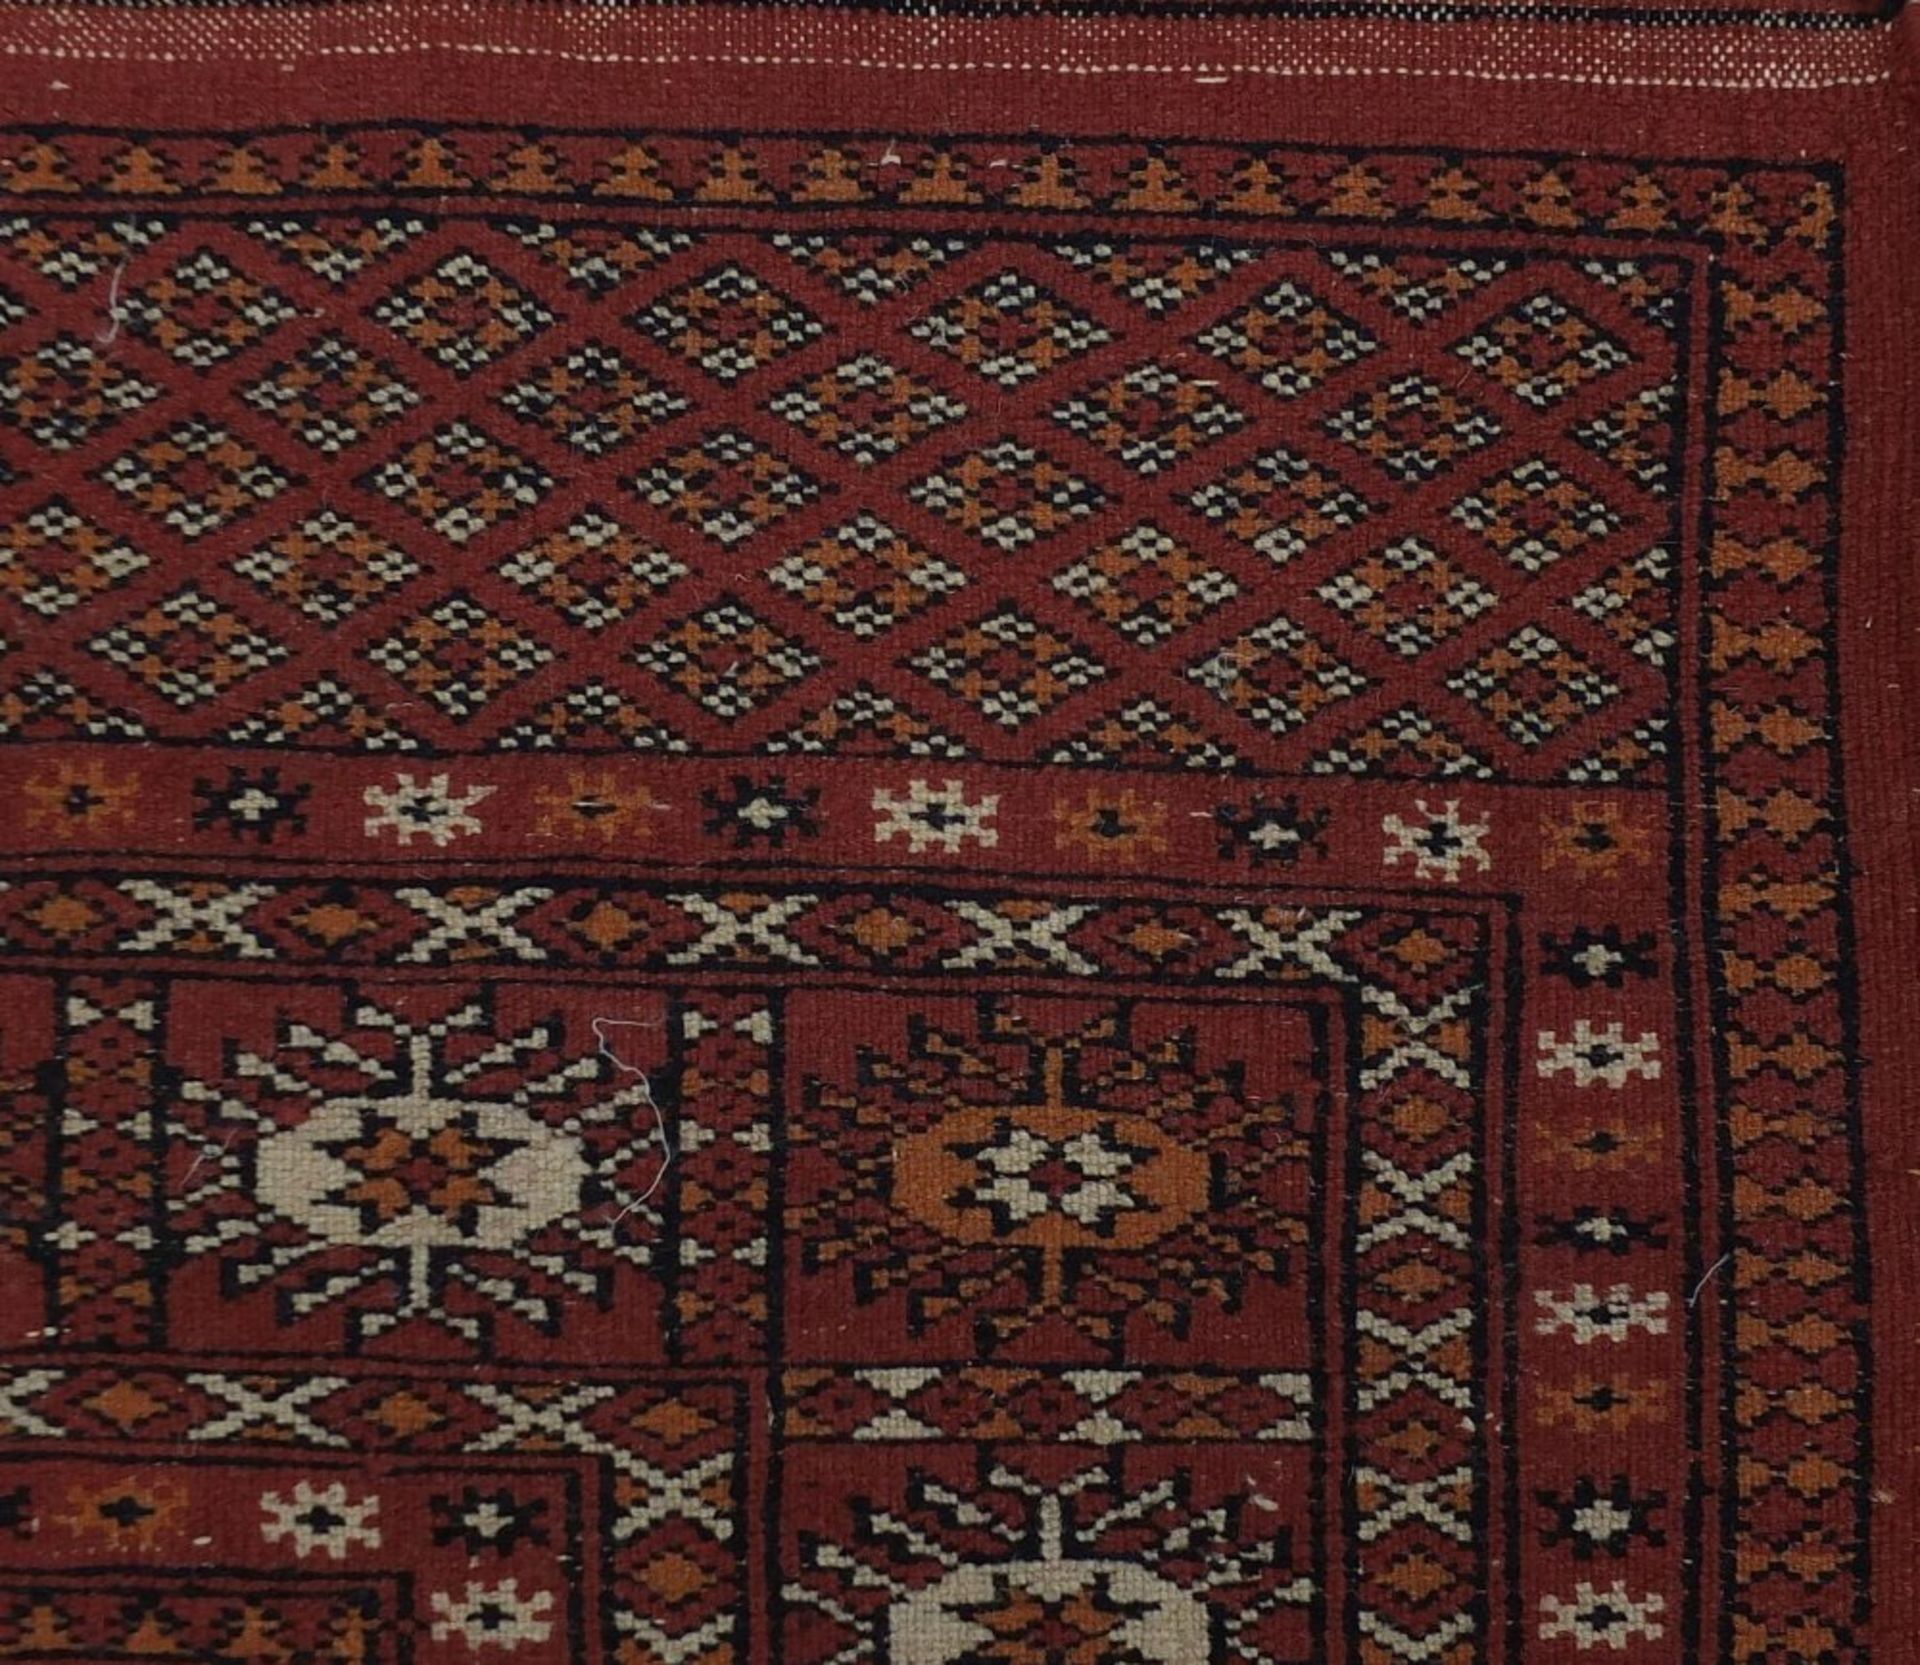 Rectangular Persian rug having a traditional repeat medallion, 200cm x 125cm :For Further - Image 4 of 4